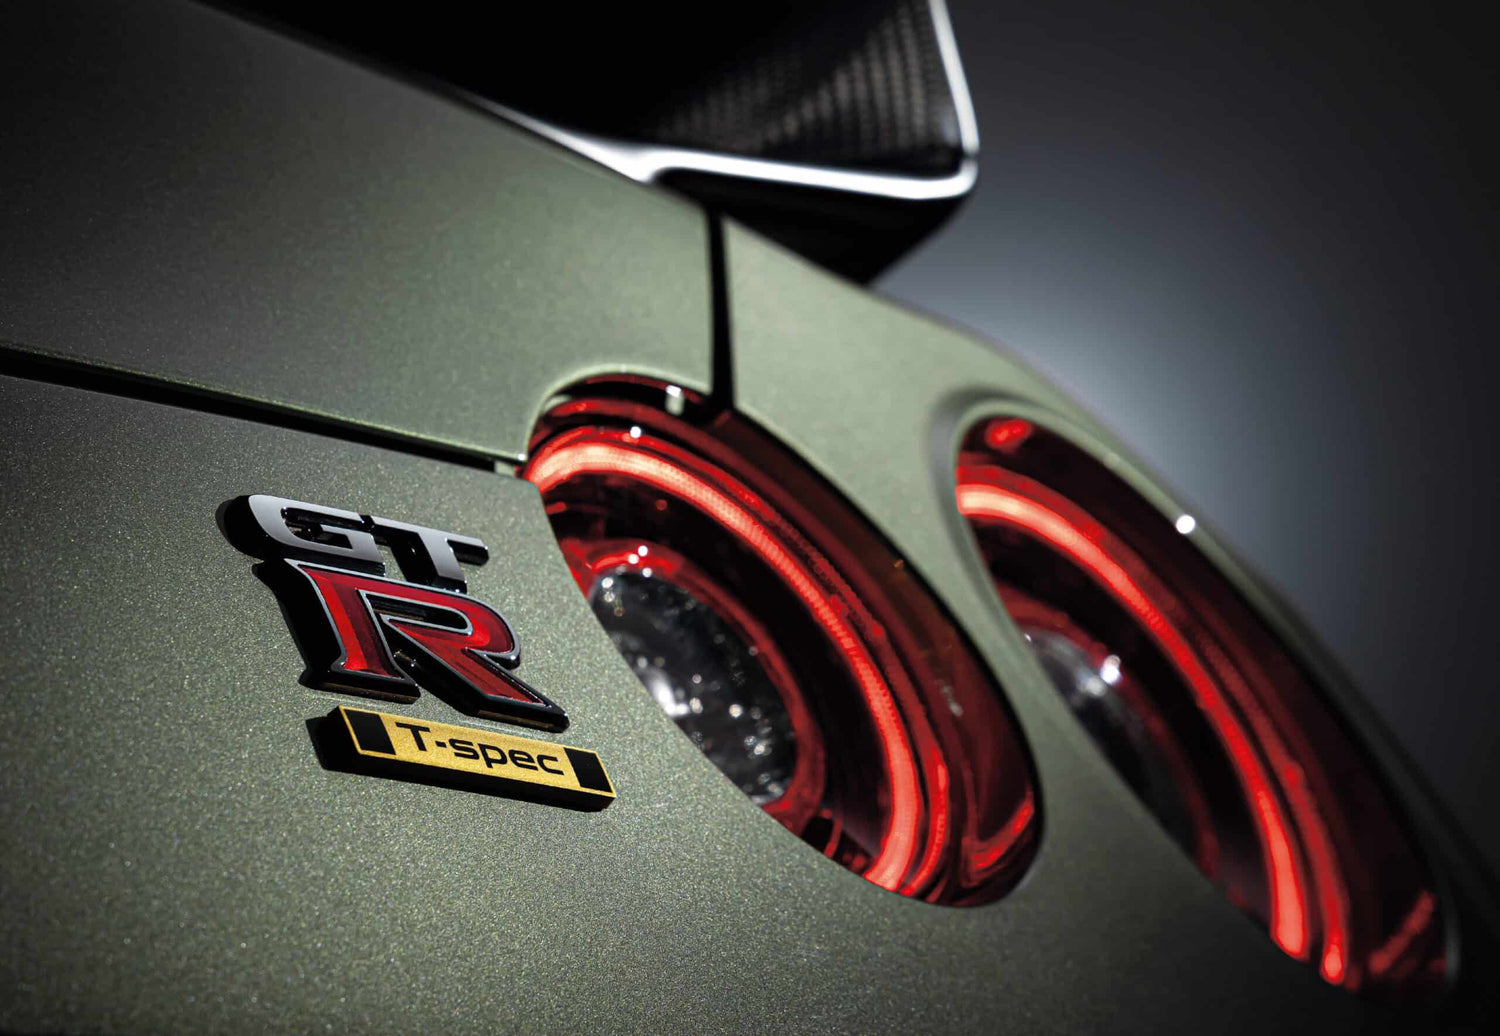 Another GT-R? Can Nissan Stop Milking The GT-R Already?